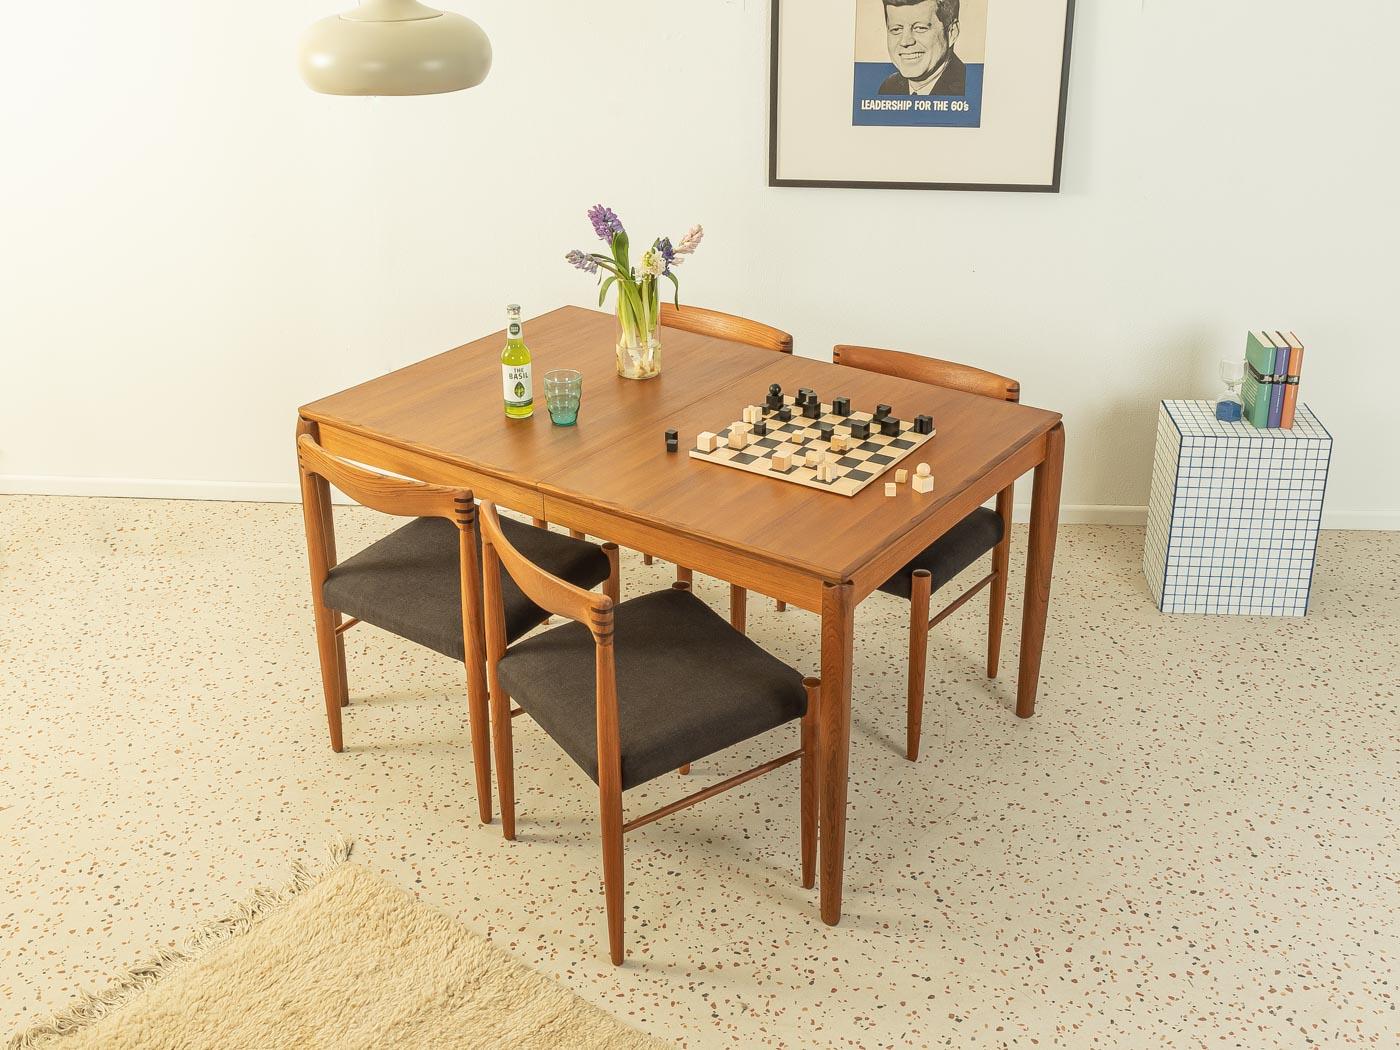 Rare extendable teak dining table from the 1960s by H.W. Klein for Bramin. Solid frame and veneered table top with solid wood edge. The insert plate can be stowed under the table top.

Quality Features:
- accomplished design: perfect proportions